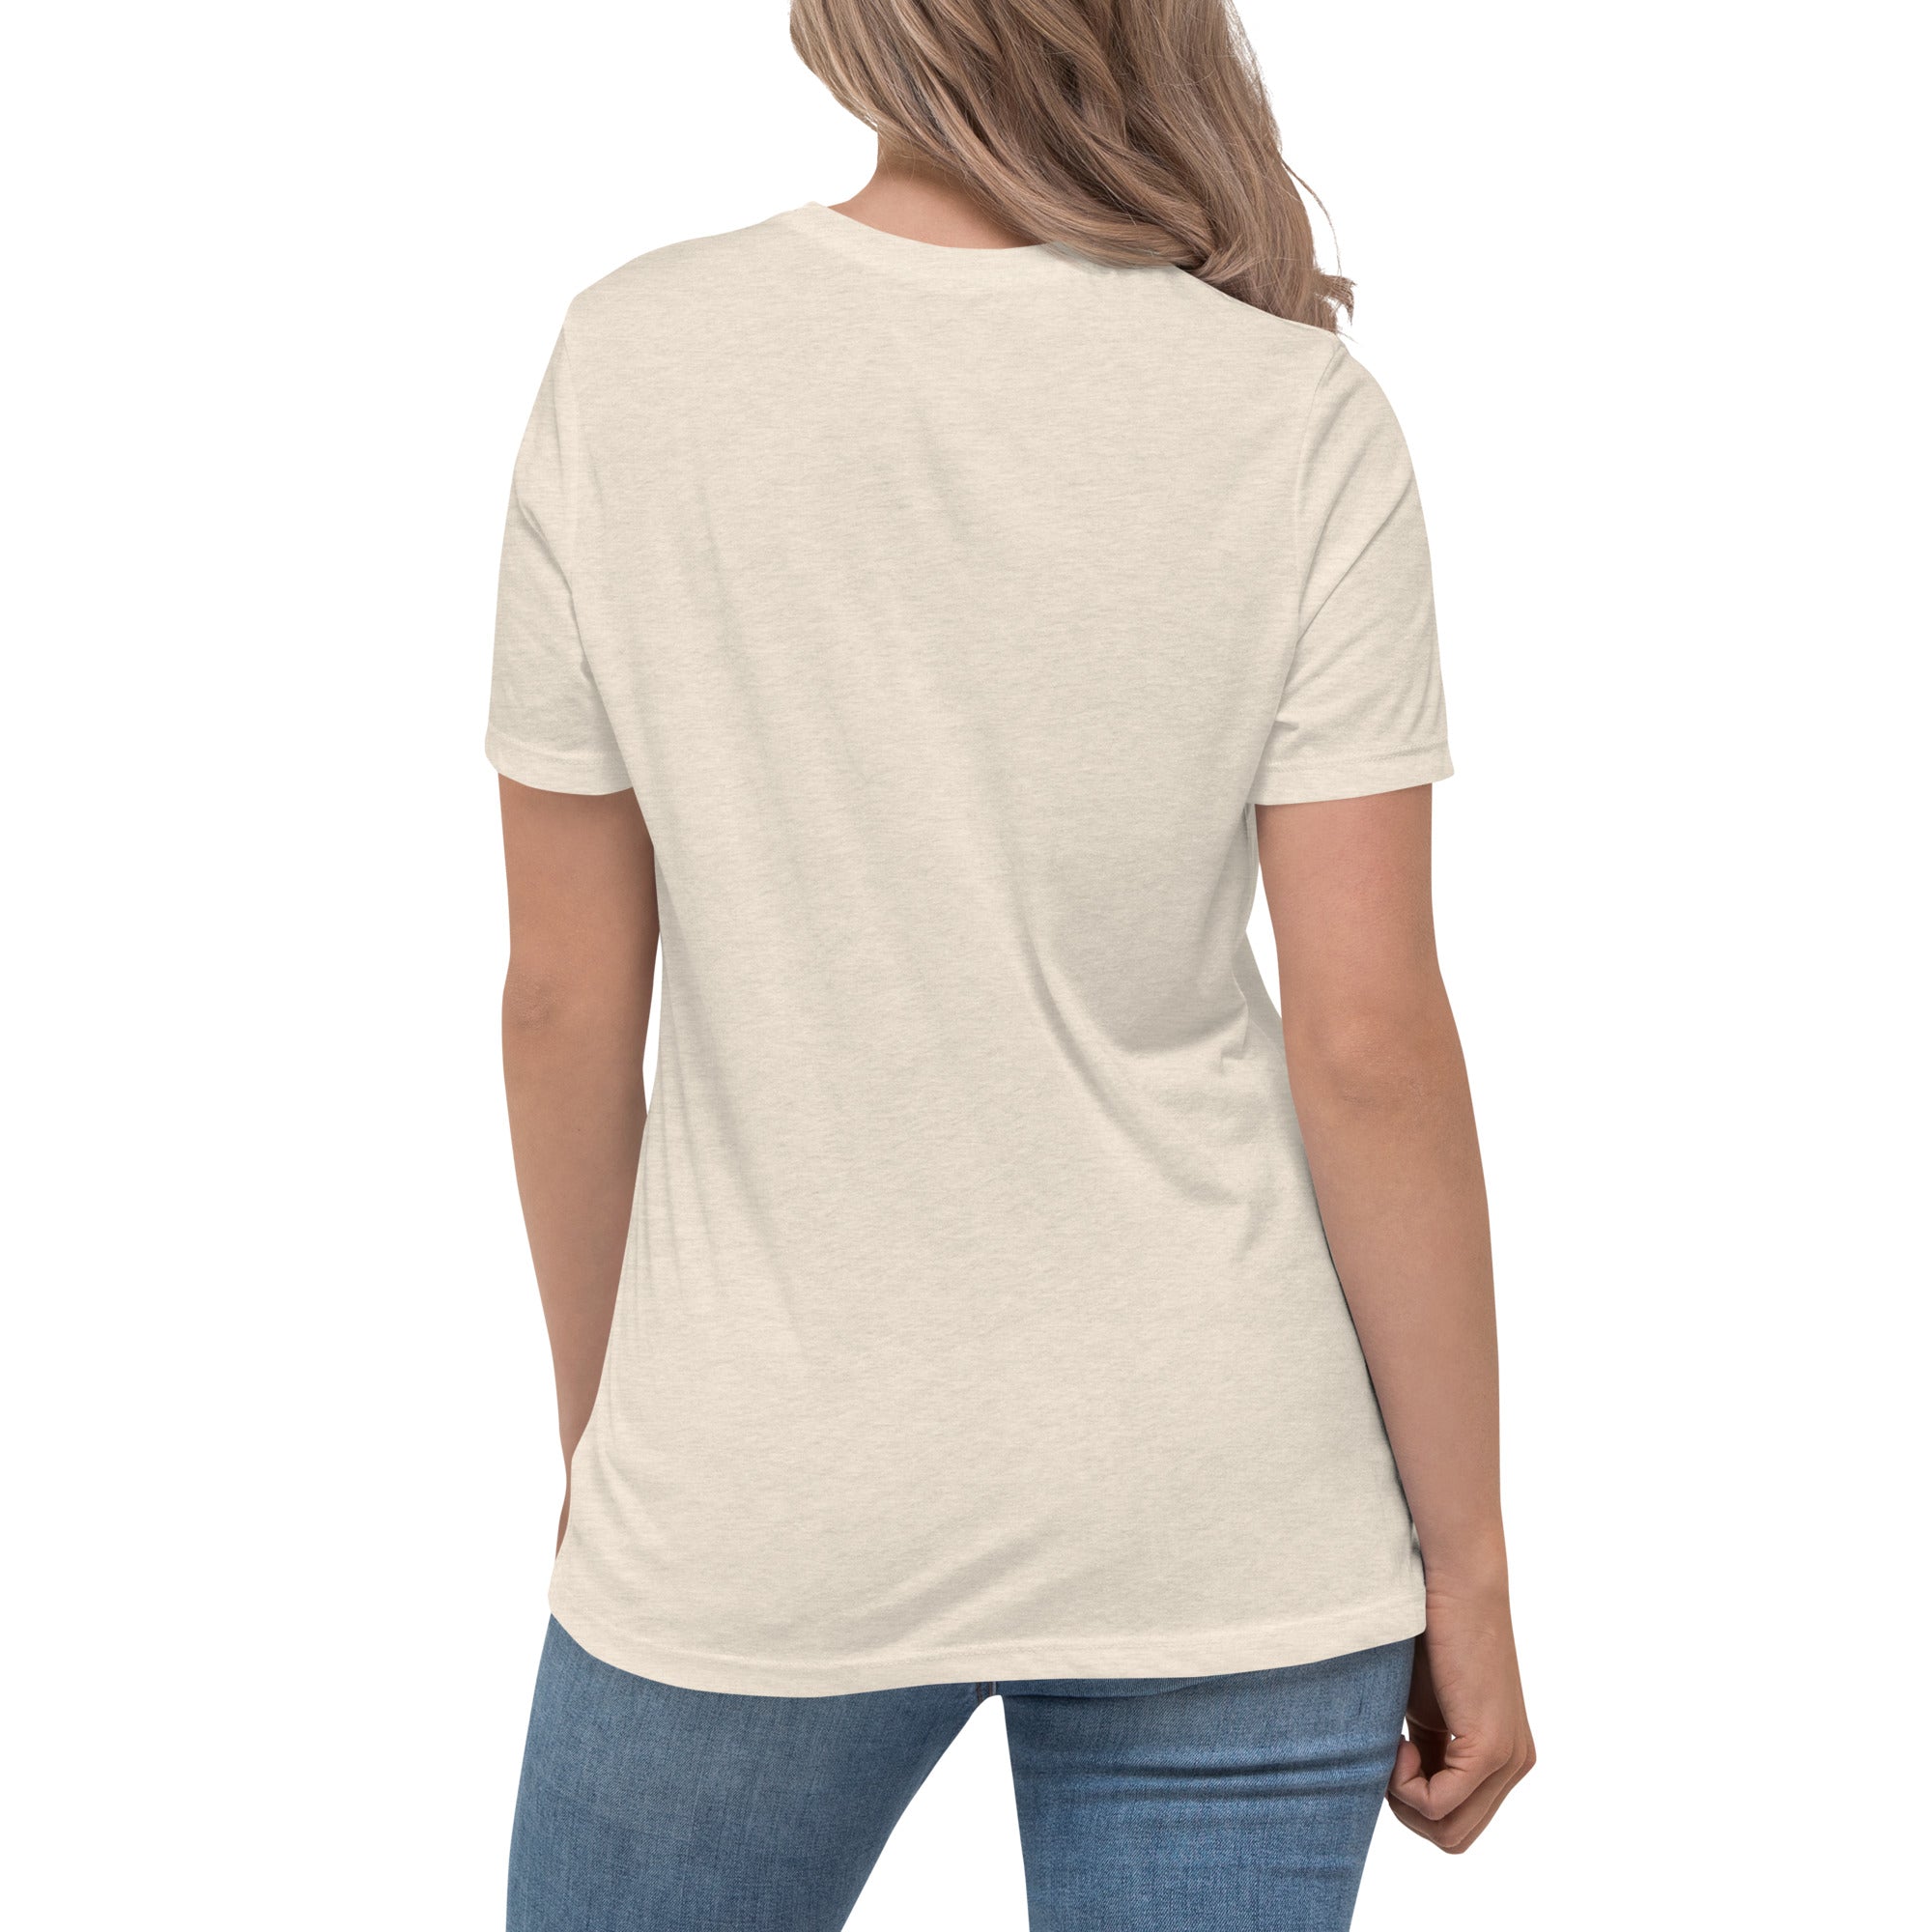 Great Tits Women's Relaxed T-Shirt